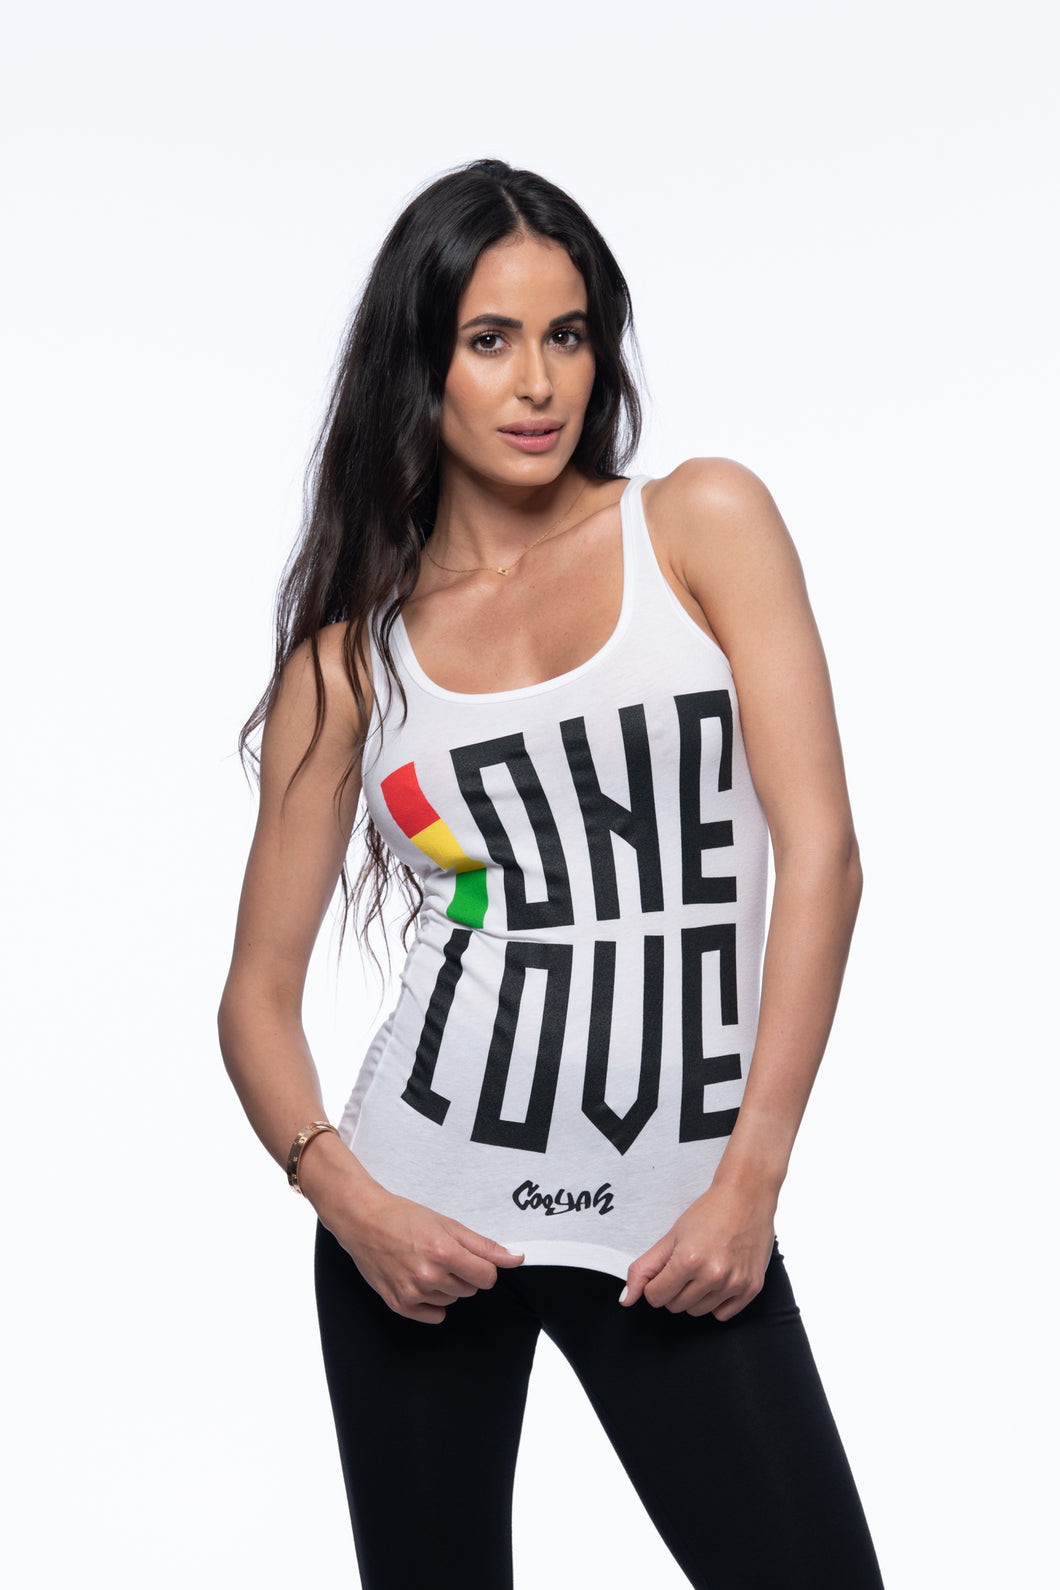 Cooyah Jamaica. Women's One Love Tank Top in white. Screen printed reggae style graphics in rasta colors. Jamaican clothing brand.